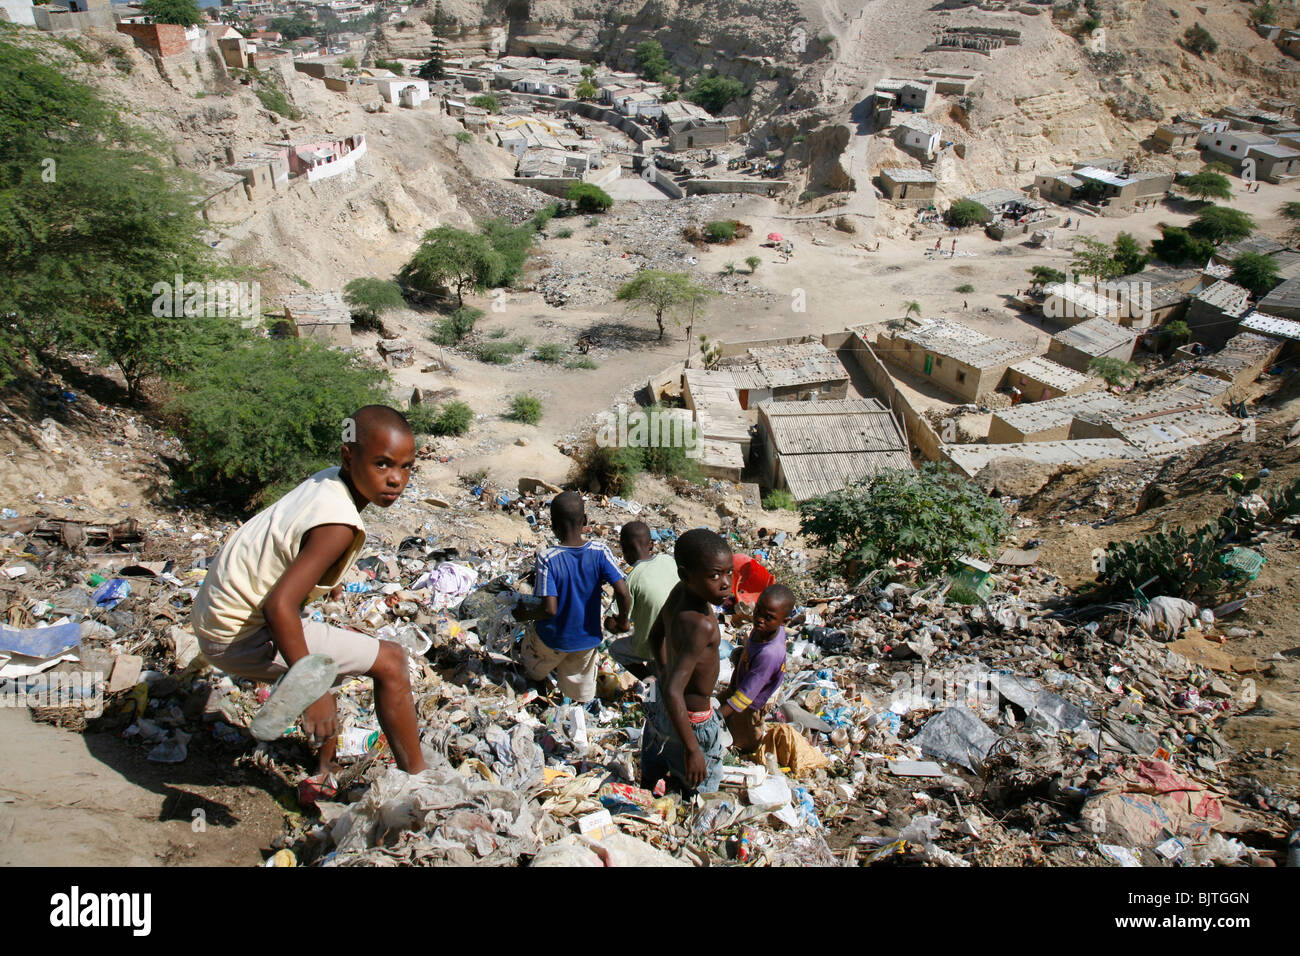 Children climbing down steep slope of rubbish just outside their home. Bairro area on the hills north of Lobito. Angola. Stock Photo